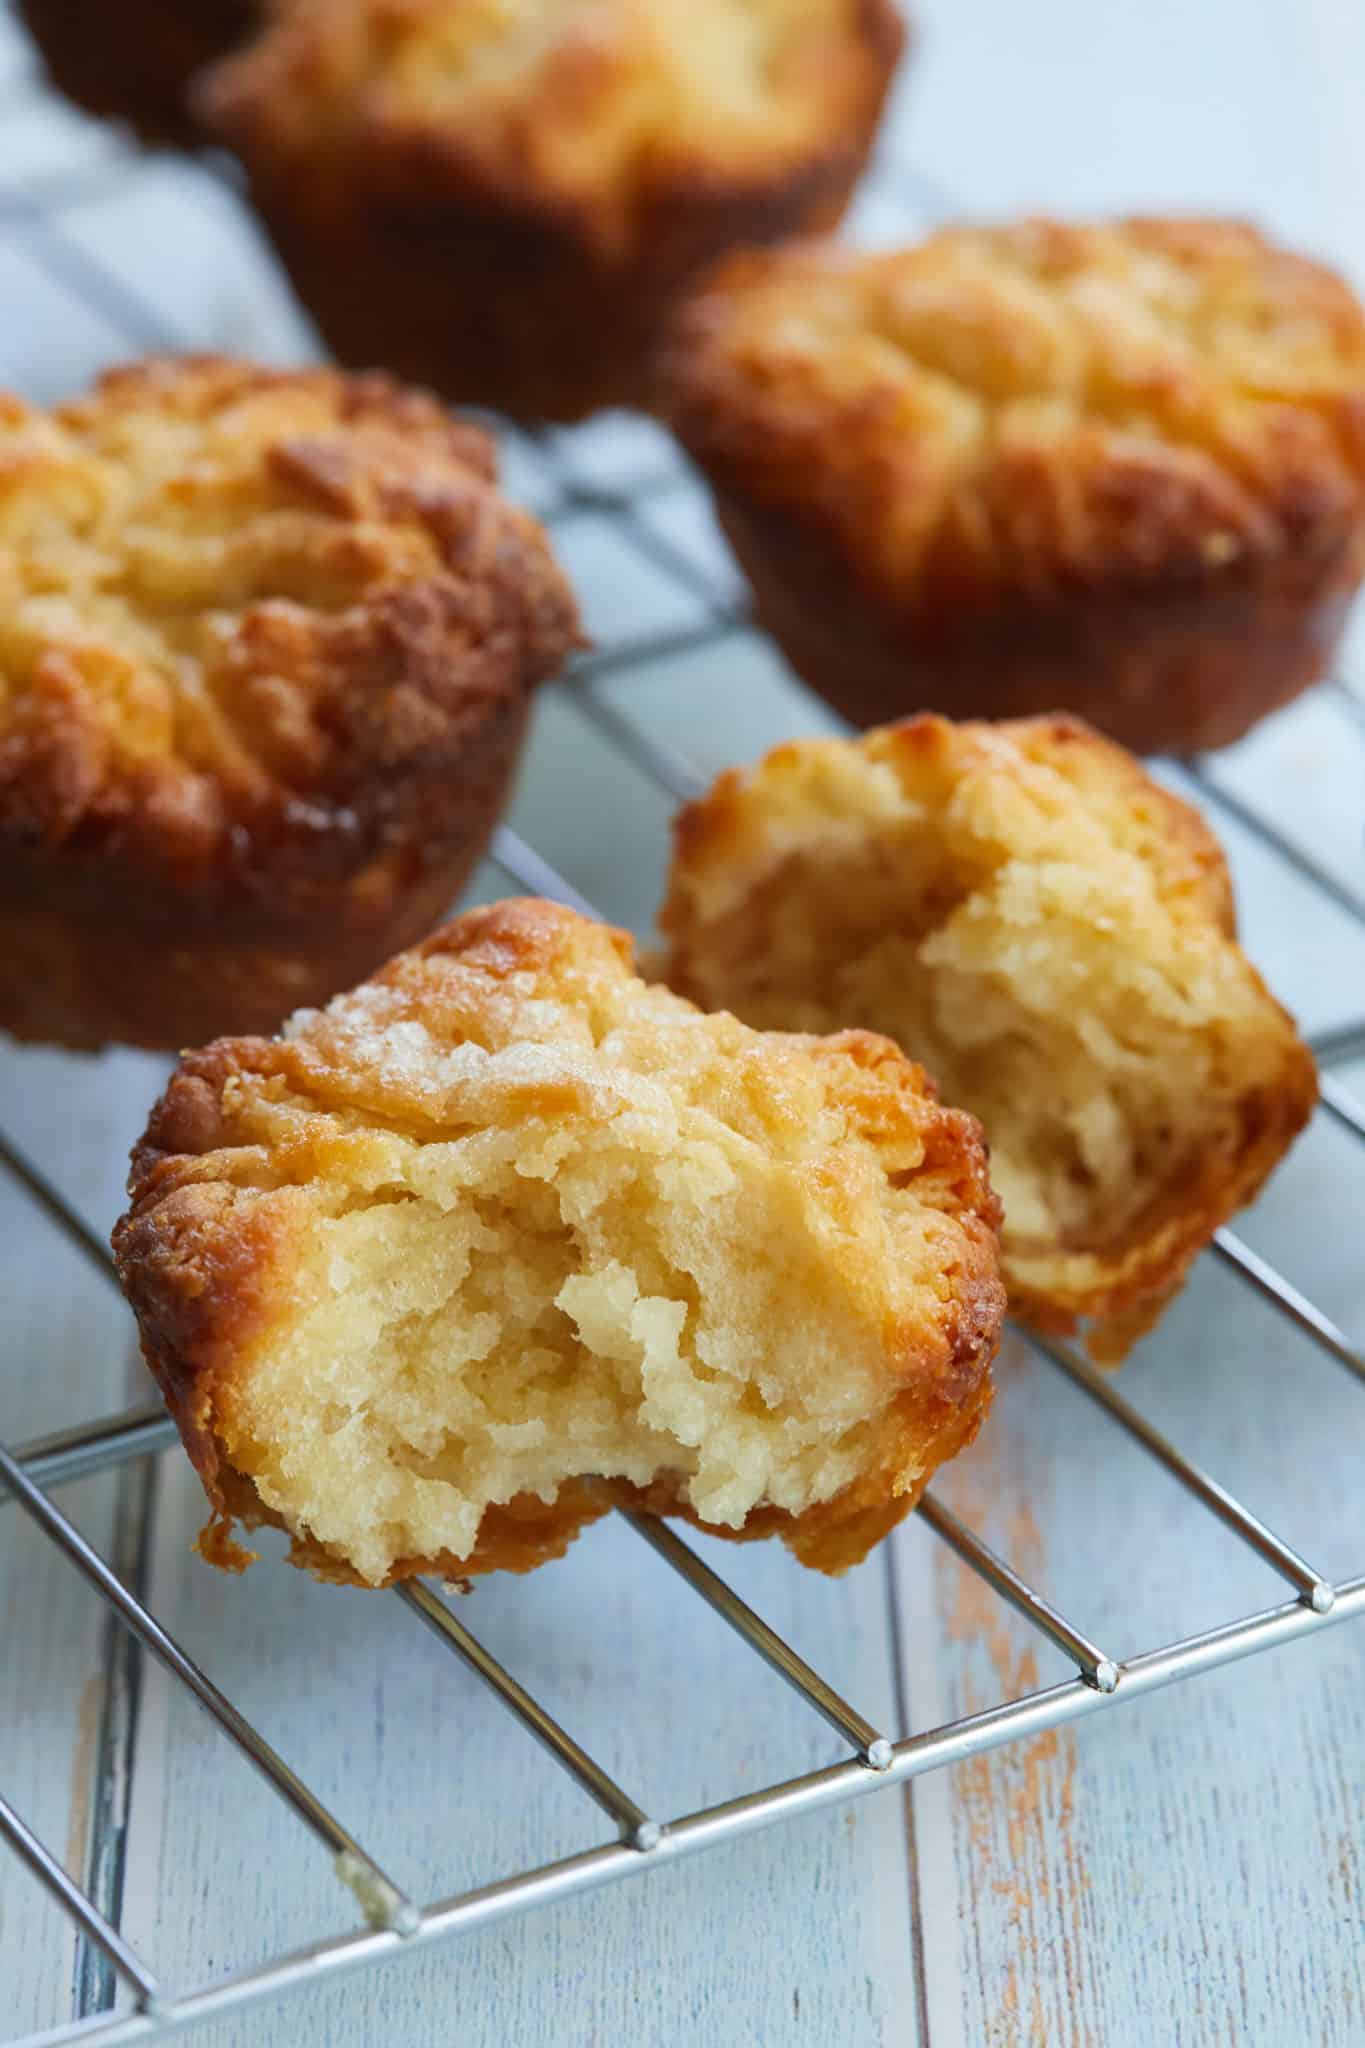 A close up of Kouign-Amann pastries on the cooling rack. They're golden brown with flakey layers. One has one bite taken, showing the soft inside.